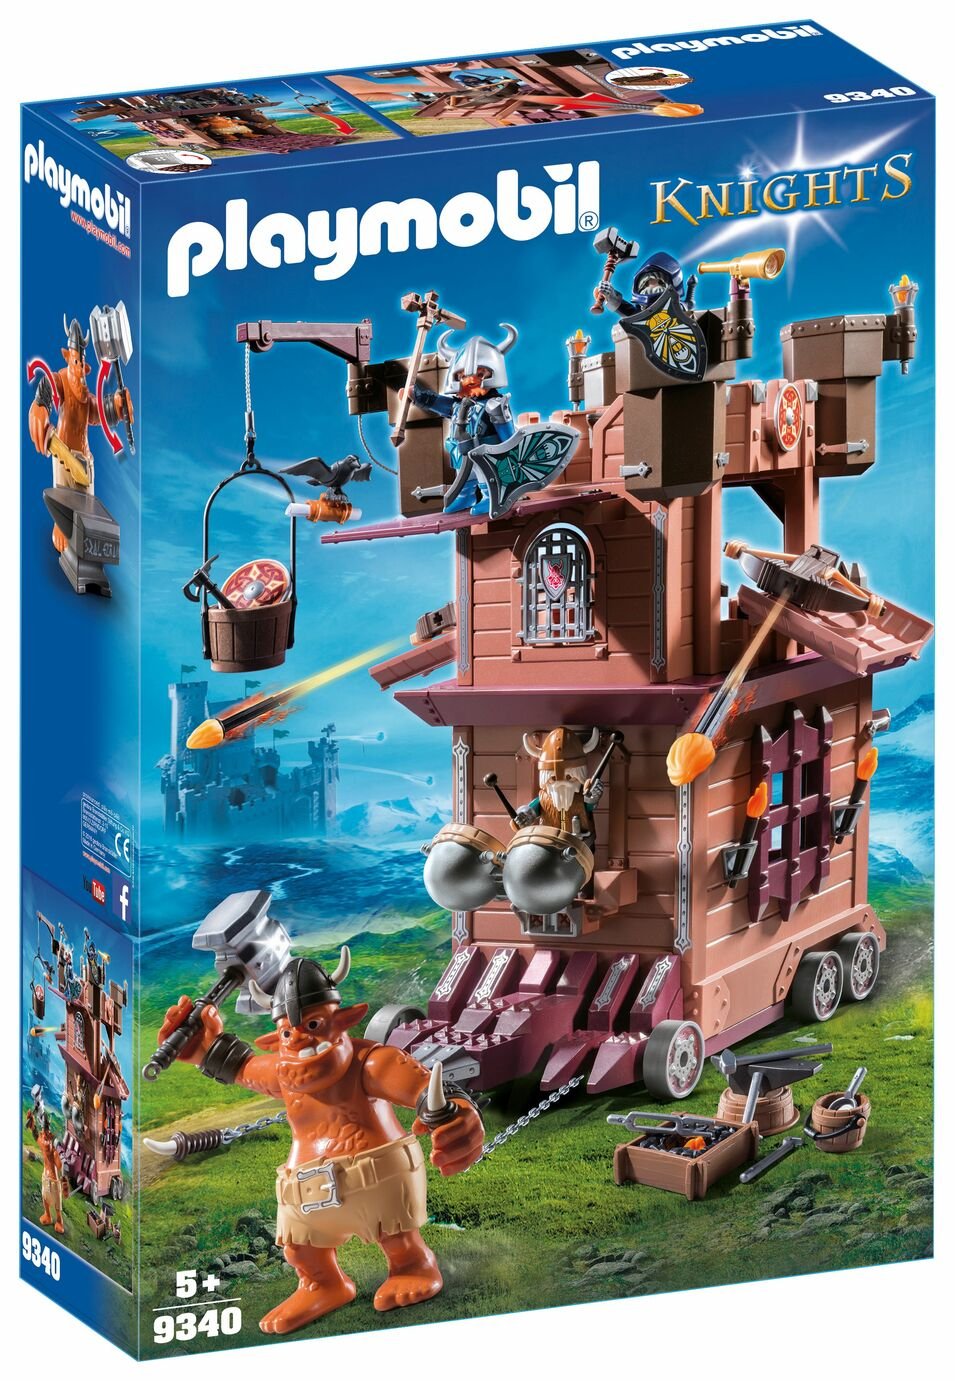 Playmobil 9340 Knights Mobile Dwarf Fortress Review